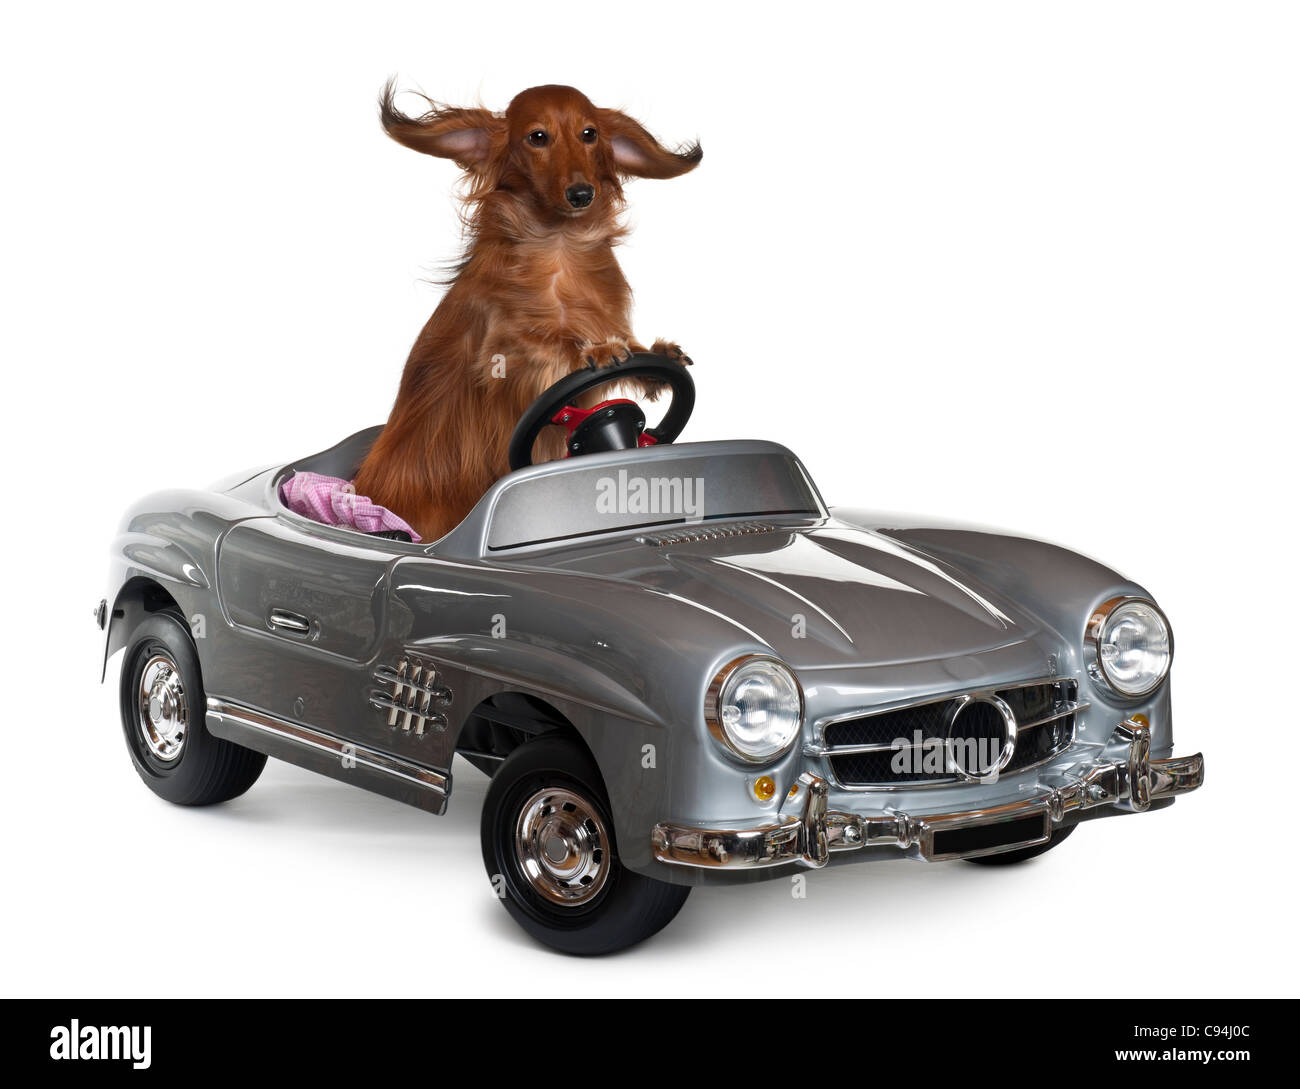 Dachshund, 3 years old, driving convertible in front of white background Stock Photo